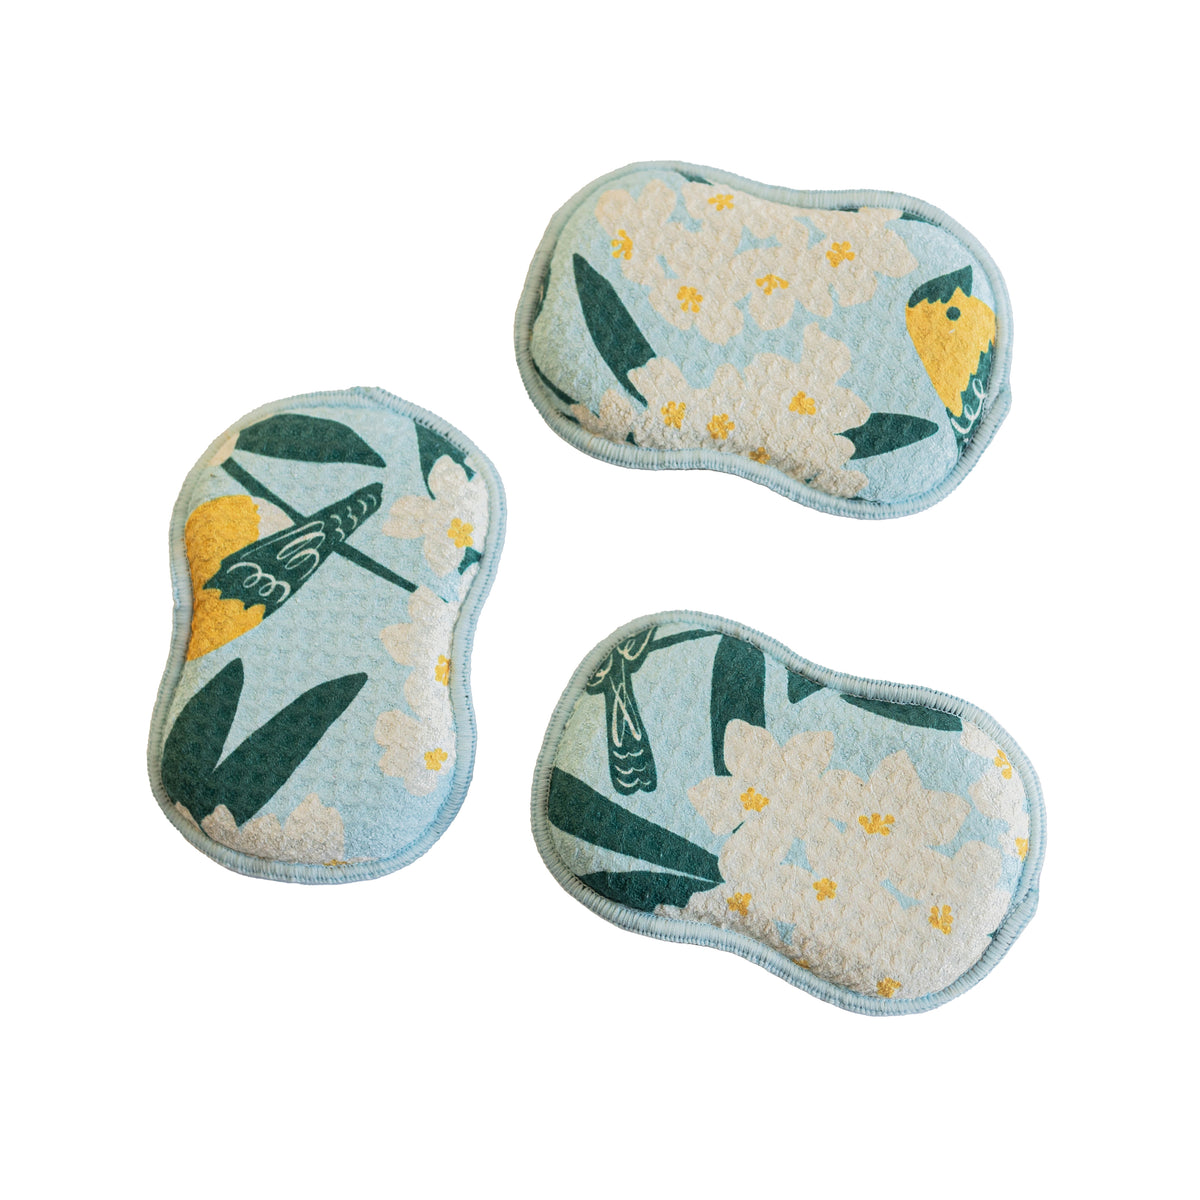 RE:usable Sponges (Set of 3) - Nuthatch Birdsong Sponges &amp; Scouring Pads Once Again Home Co. Light Blue  